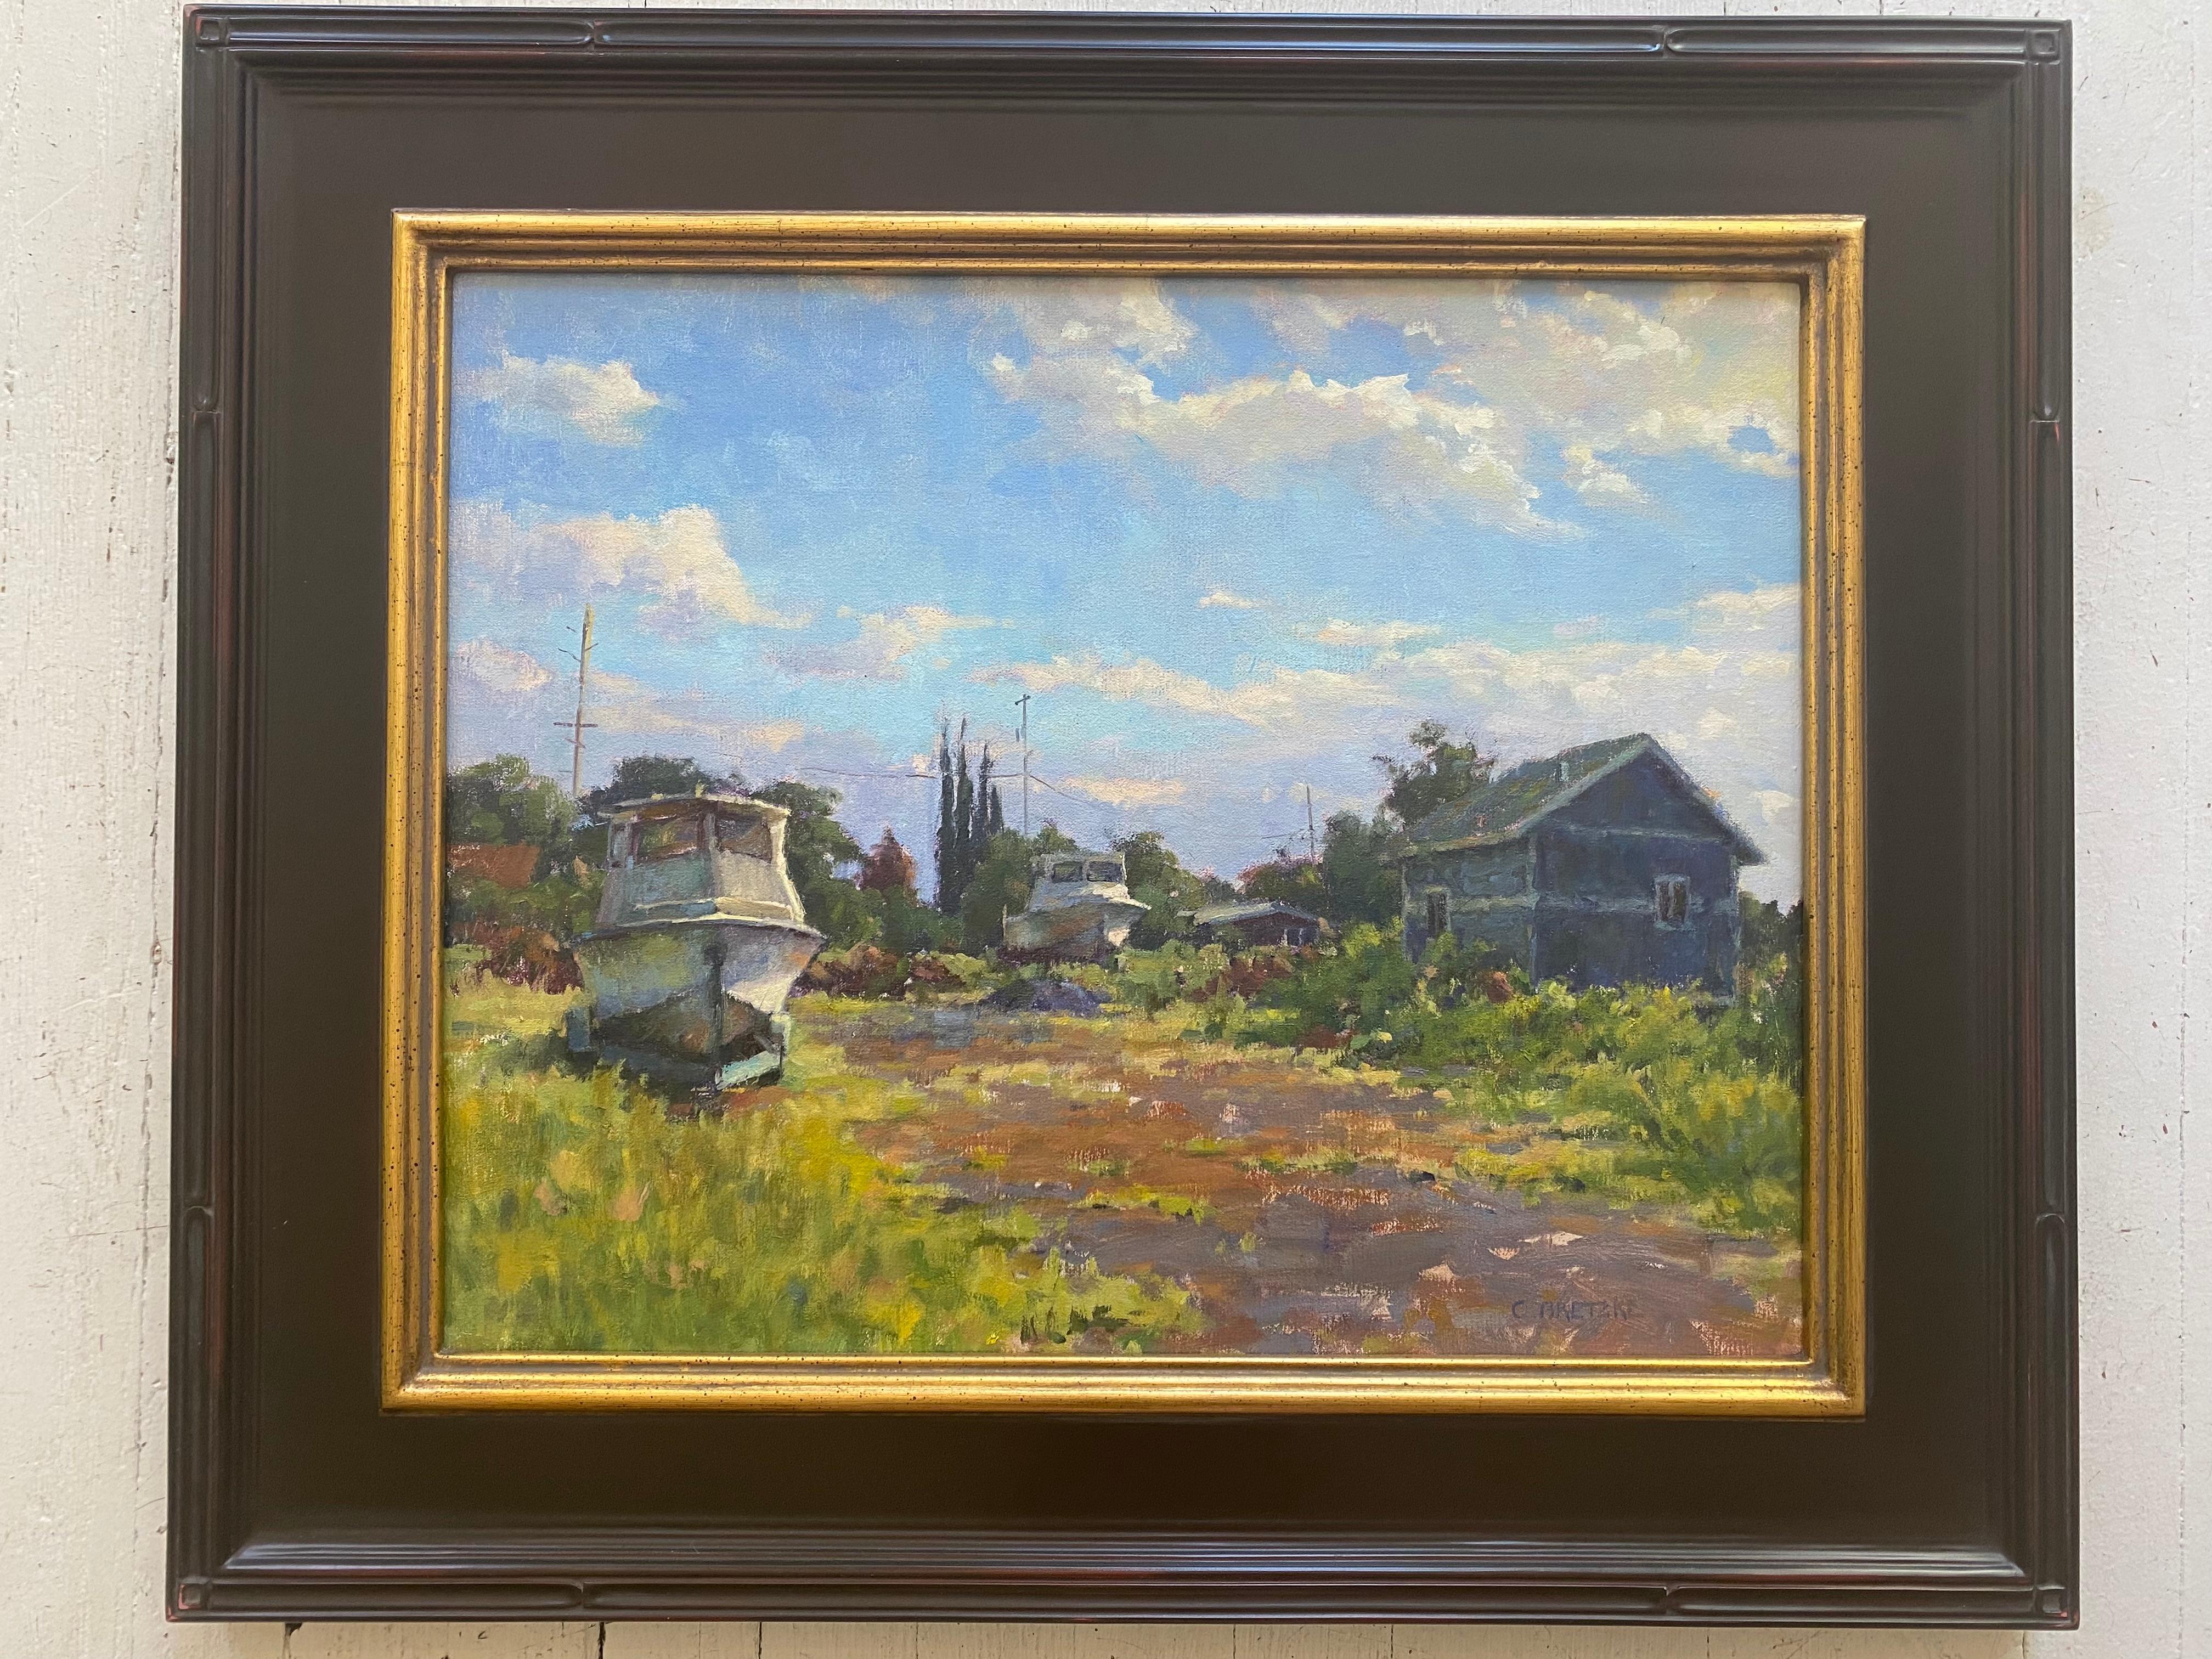 Boats on a Back Lot - Painting by Carl Bretzke